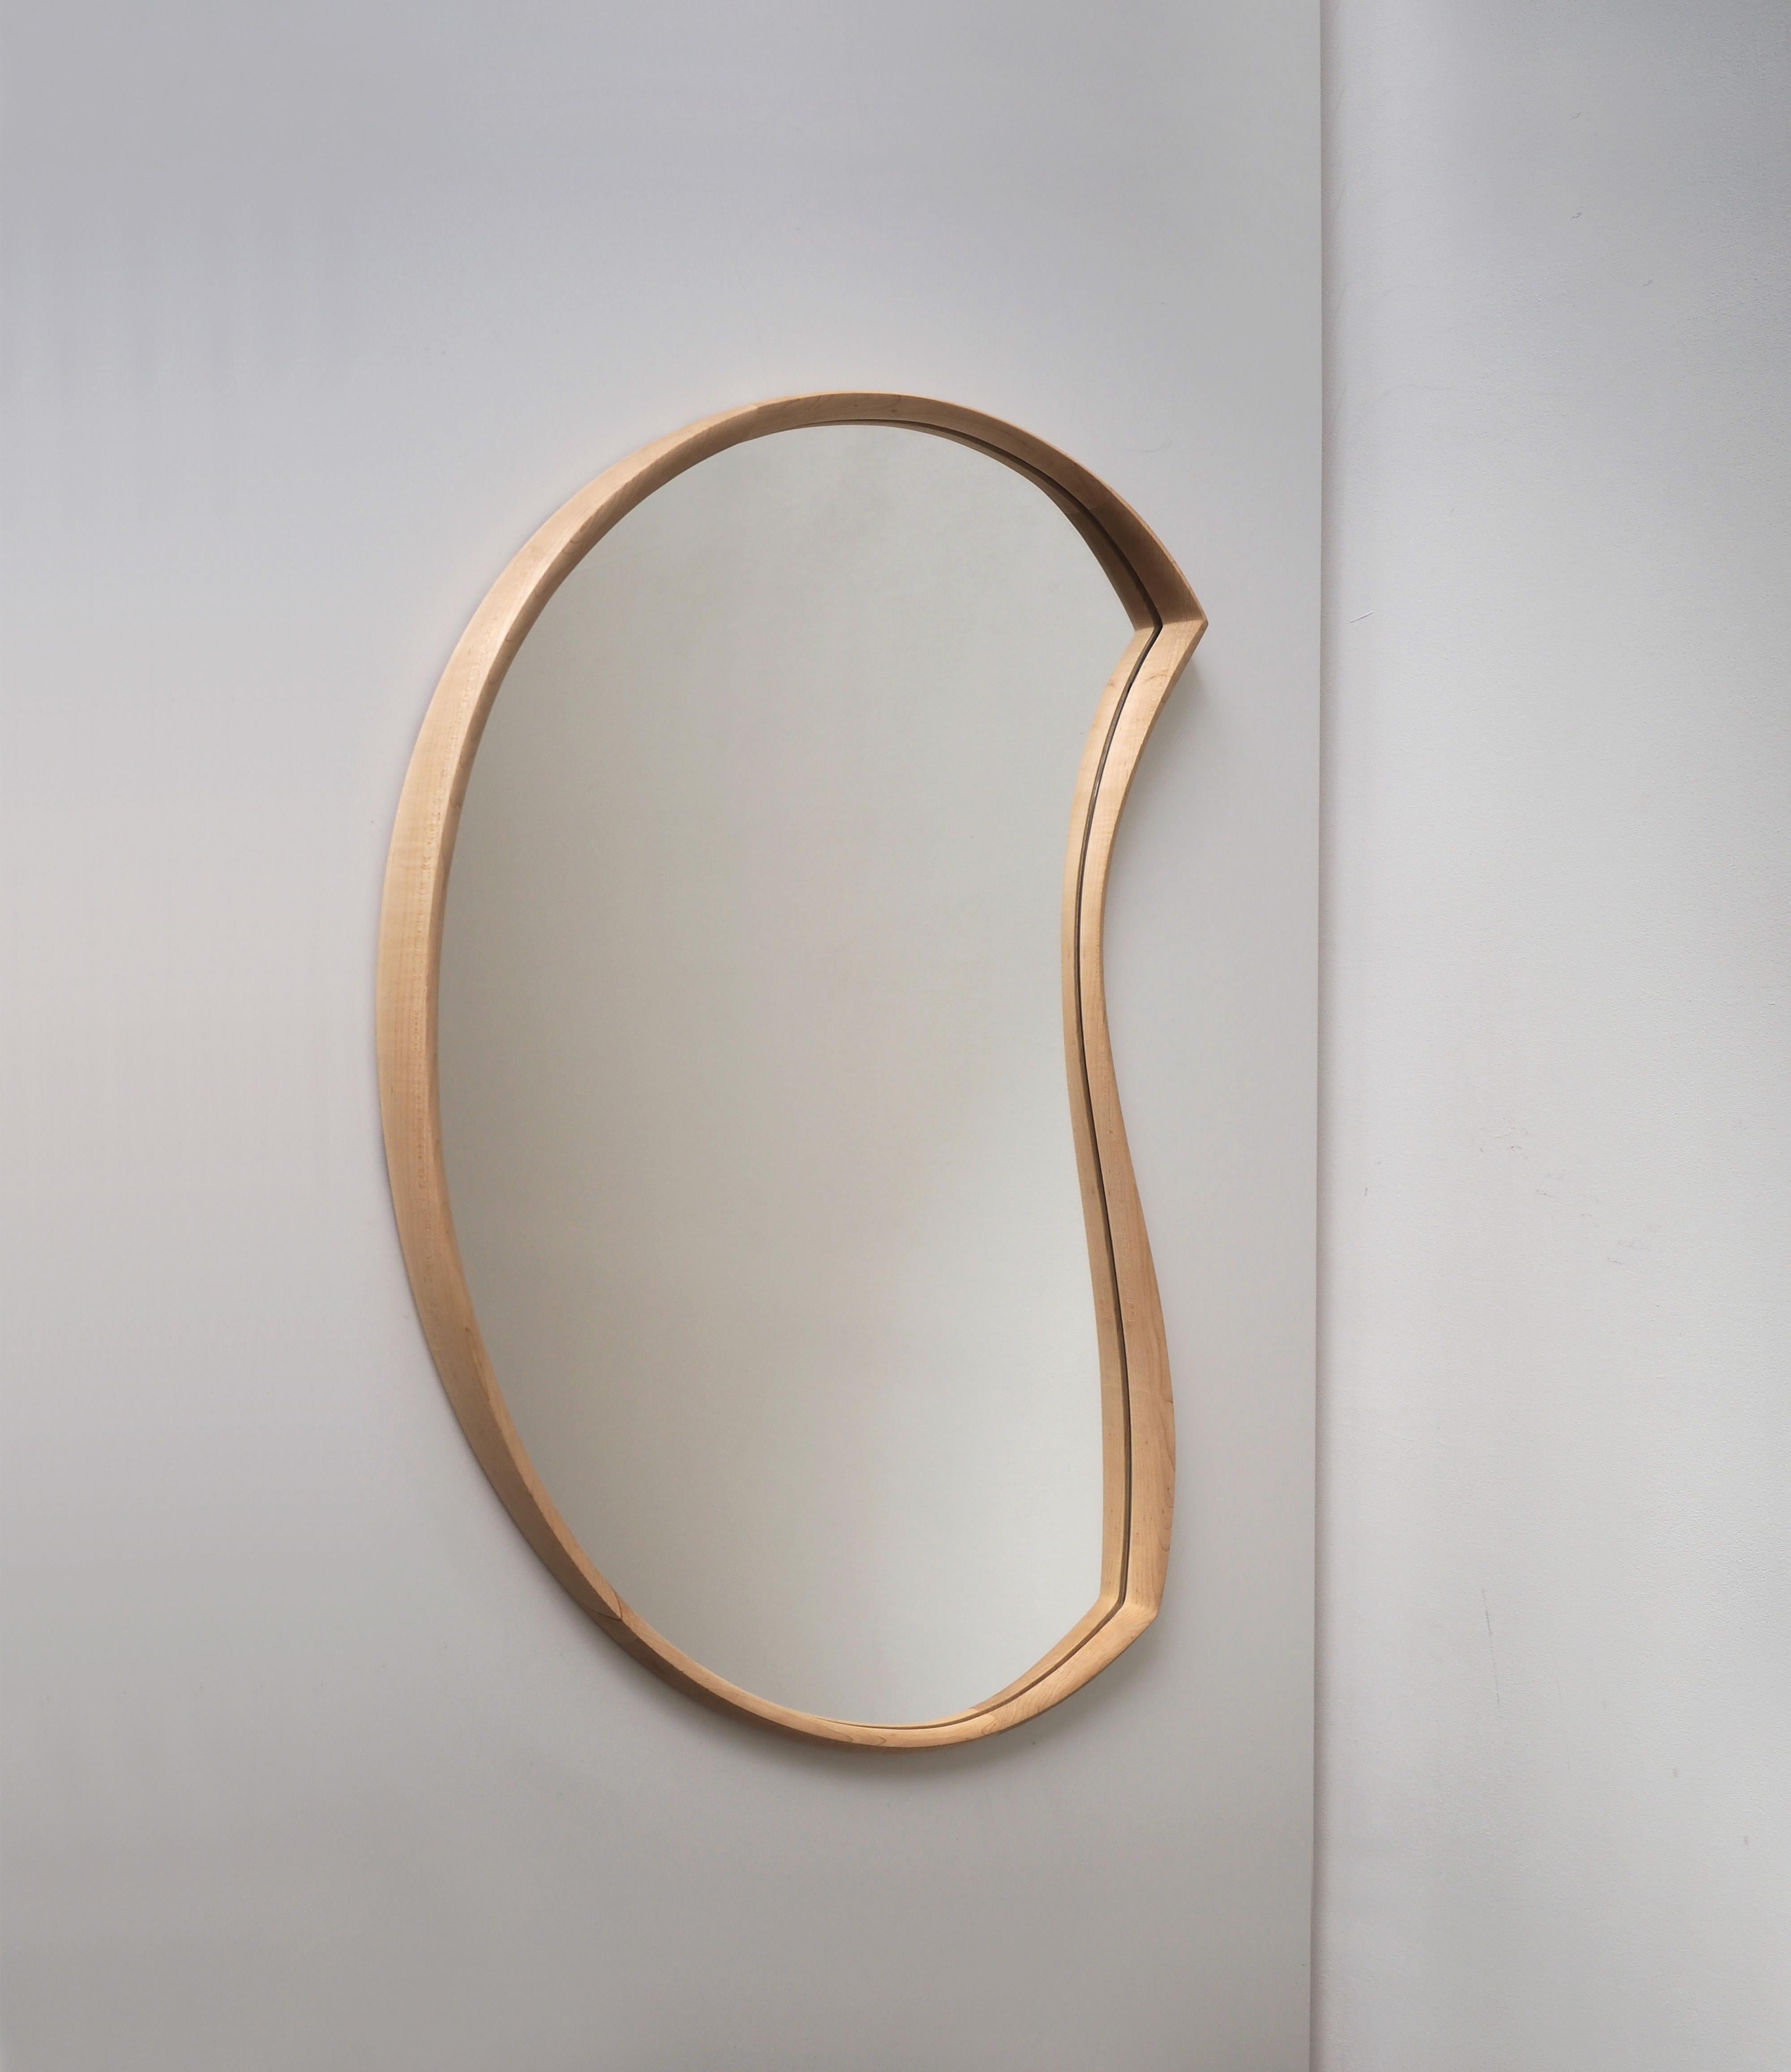 'Moon Mirror' by Soo Joo is a wooden wall mirror with a timeless and asymmetric form. Moon Mirror is hung with a custom-made steel french cleat and hangs flush on the wall. 

This mirror silhouette is minimal but dynamic nature. The undulating thin